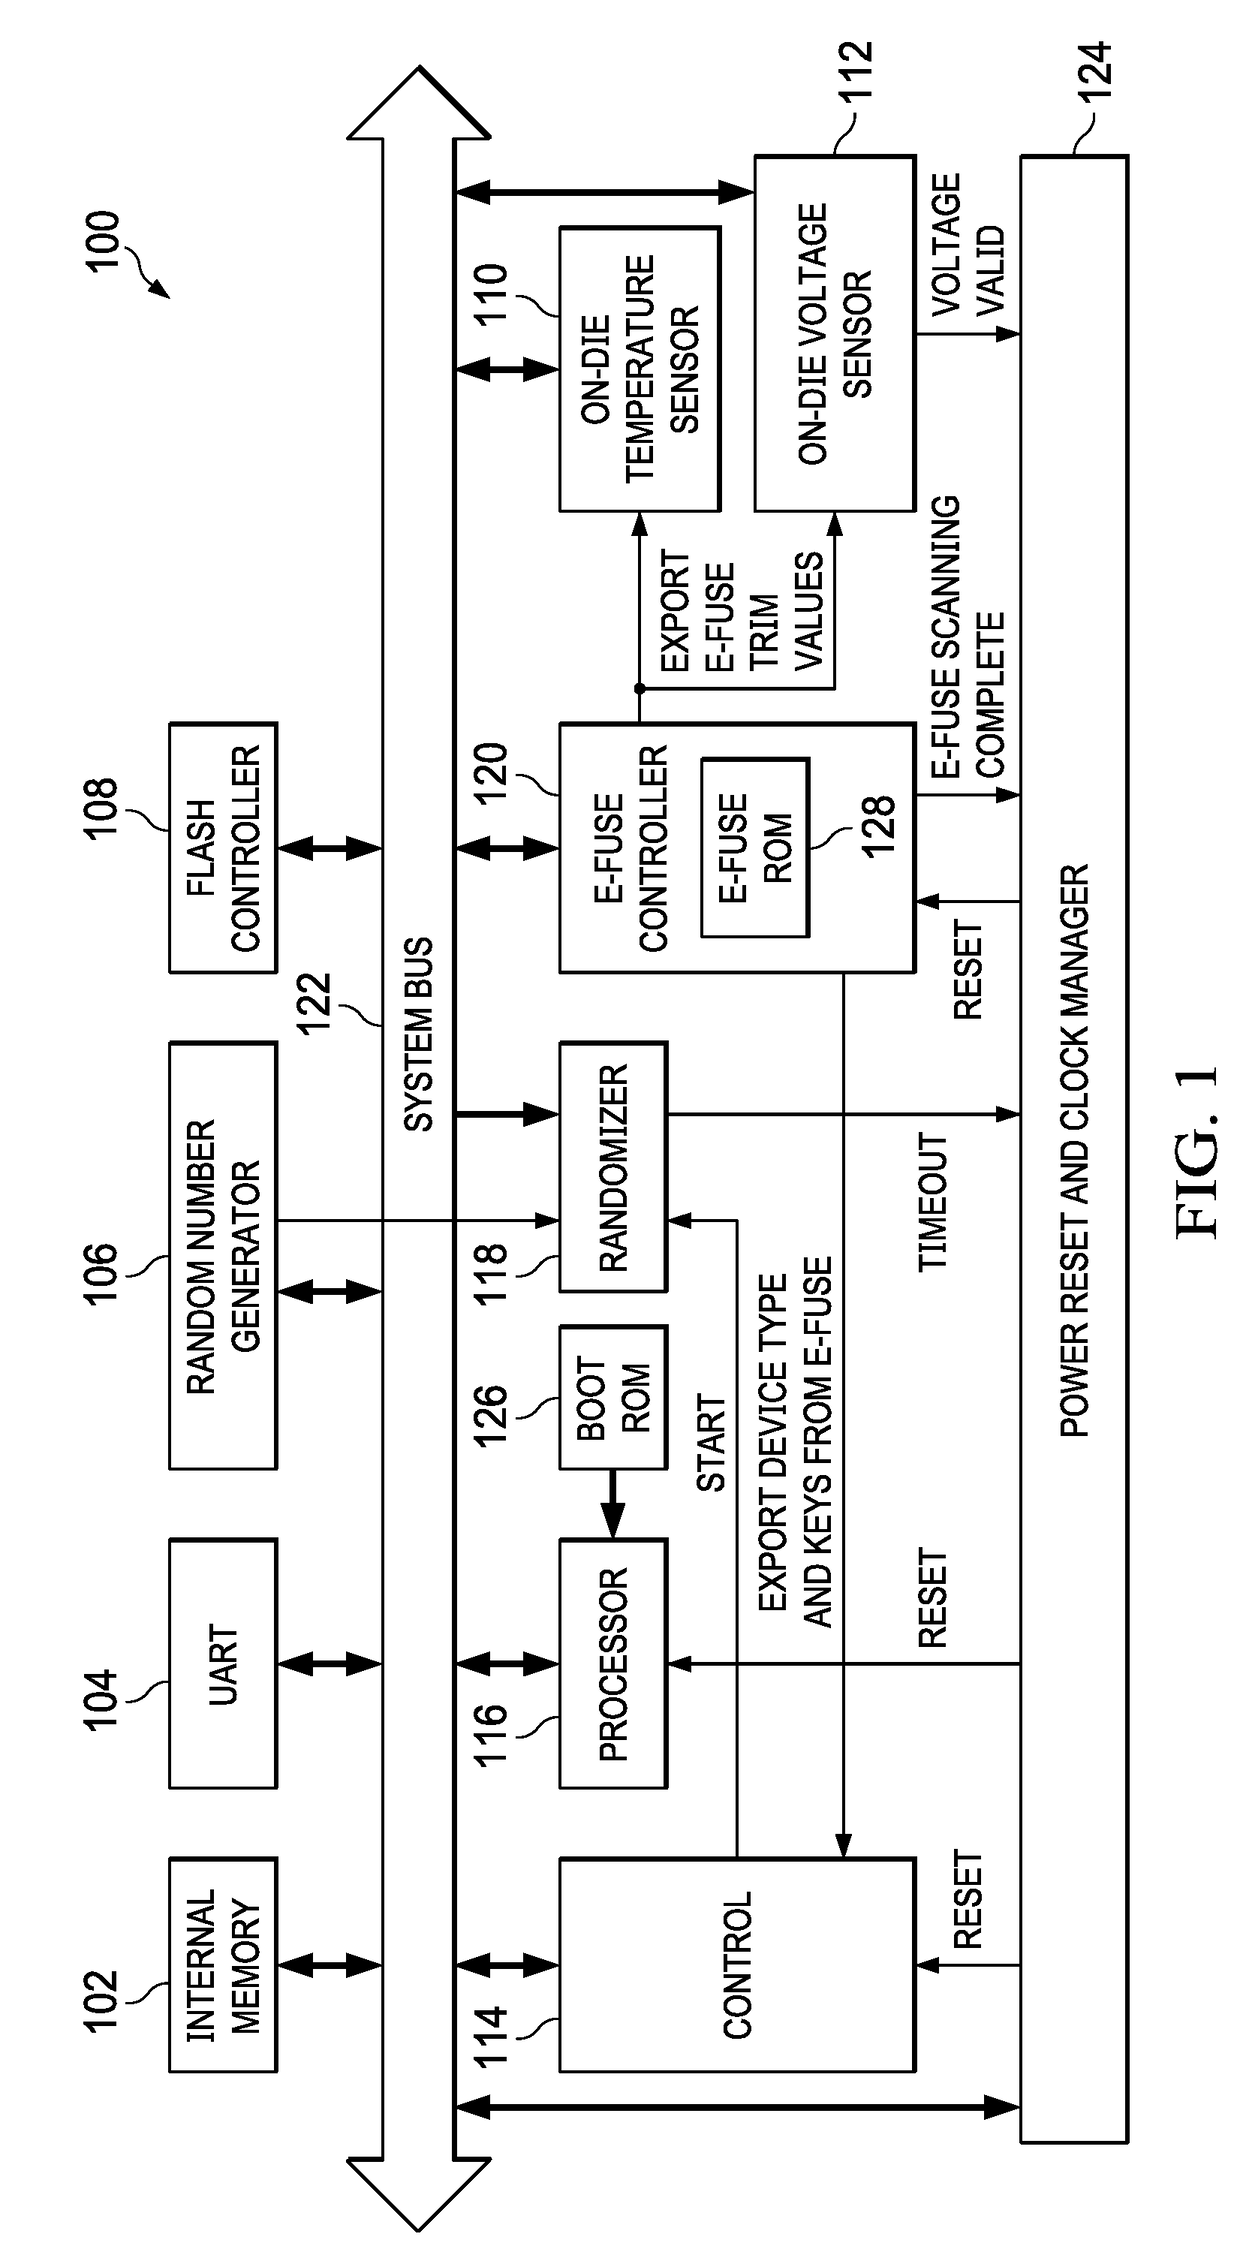 Randomized Execution Countermeasures Against Fault Injection Attacks During Boot of an Embedded Device